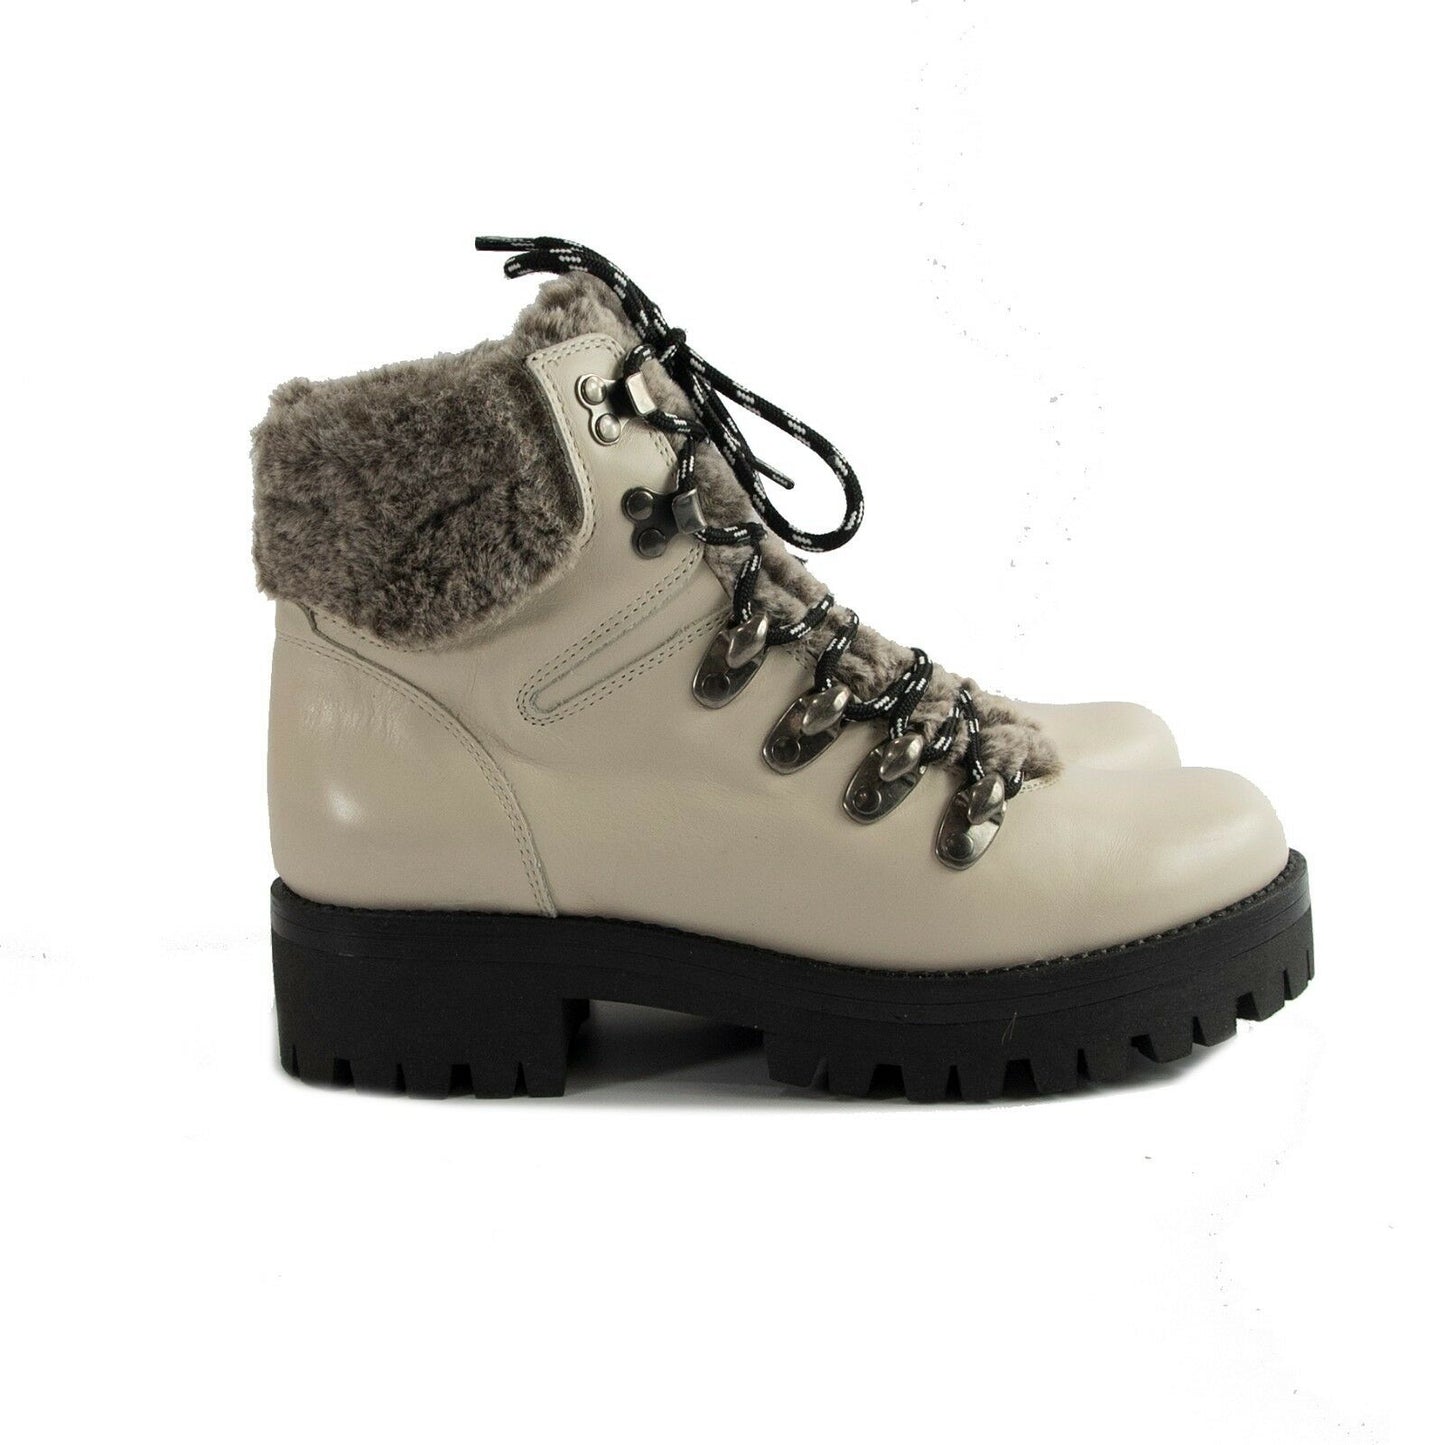 Maiden Lane Ivory Leather Marbut Faux Fur Lace Up Lug Sole Hiking Ankle Boots 39